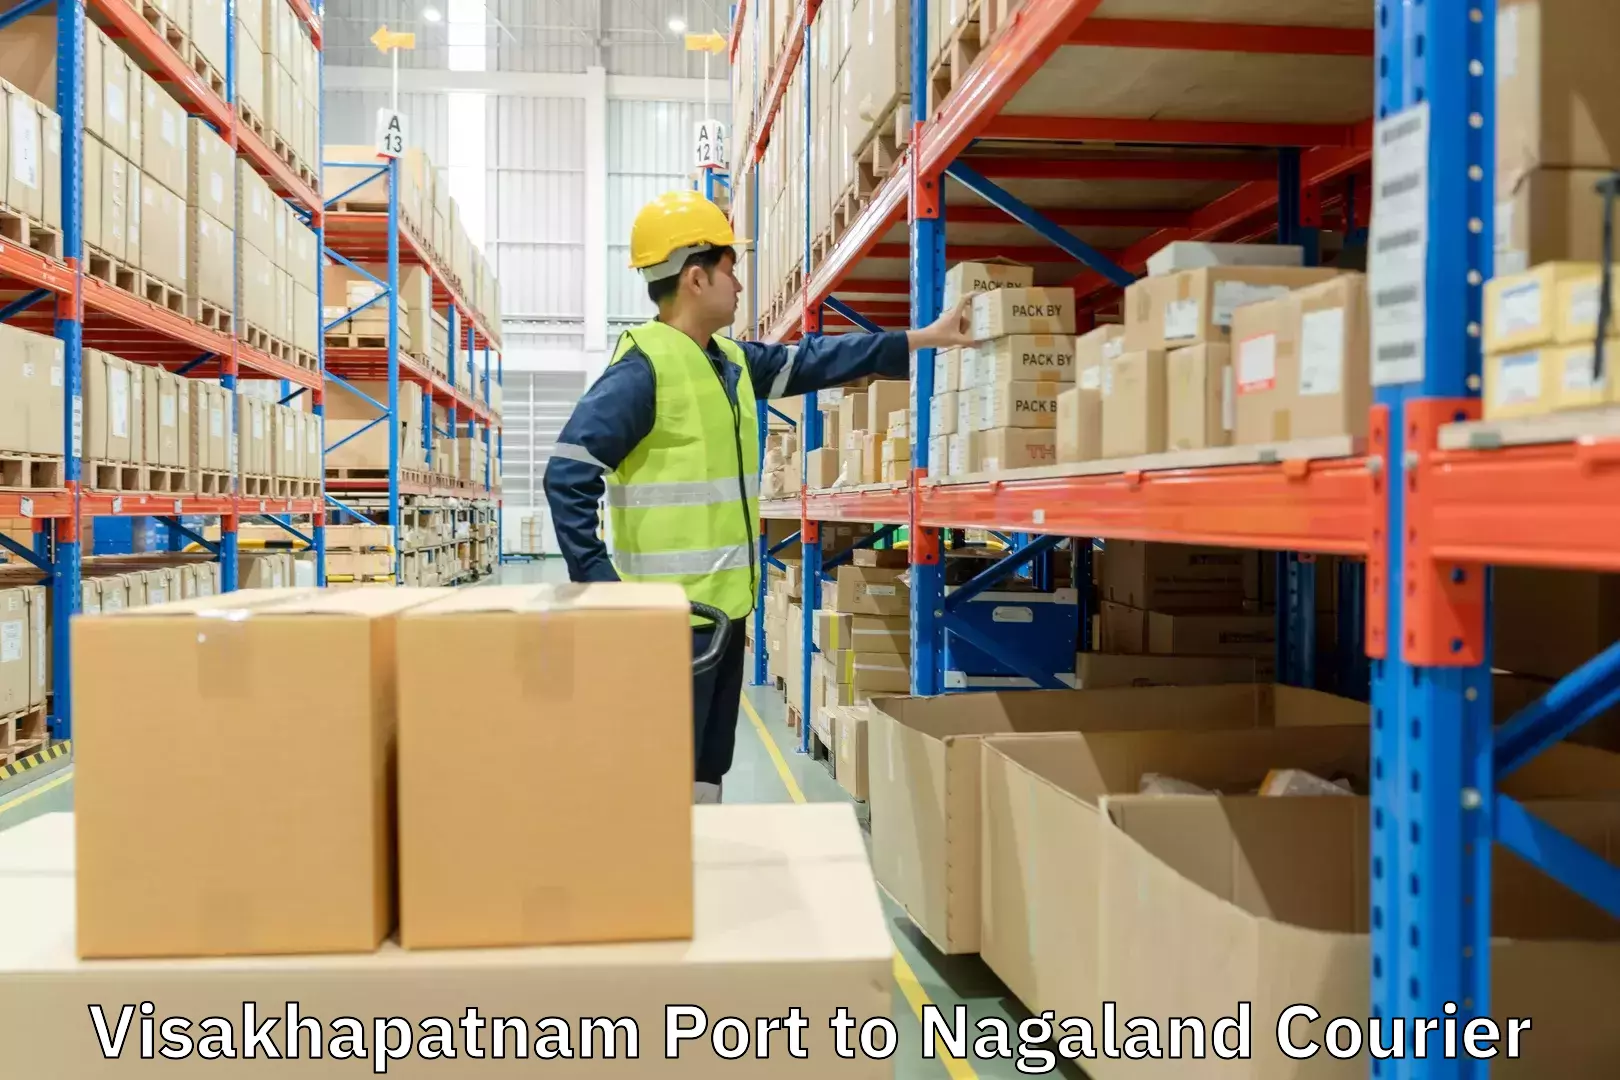 Residential courier service Visakhapatnam Port to Nagaland